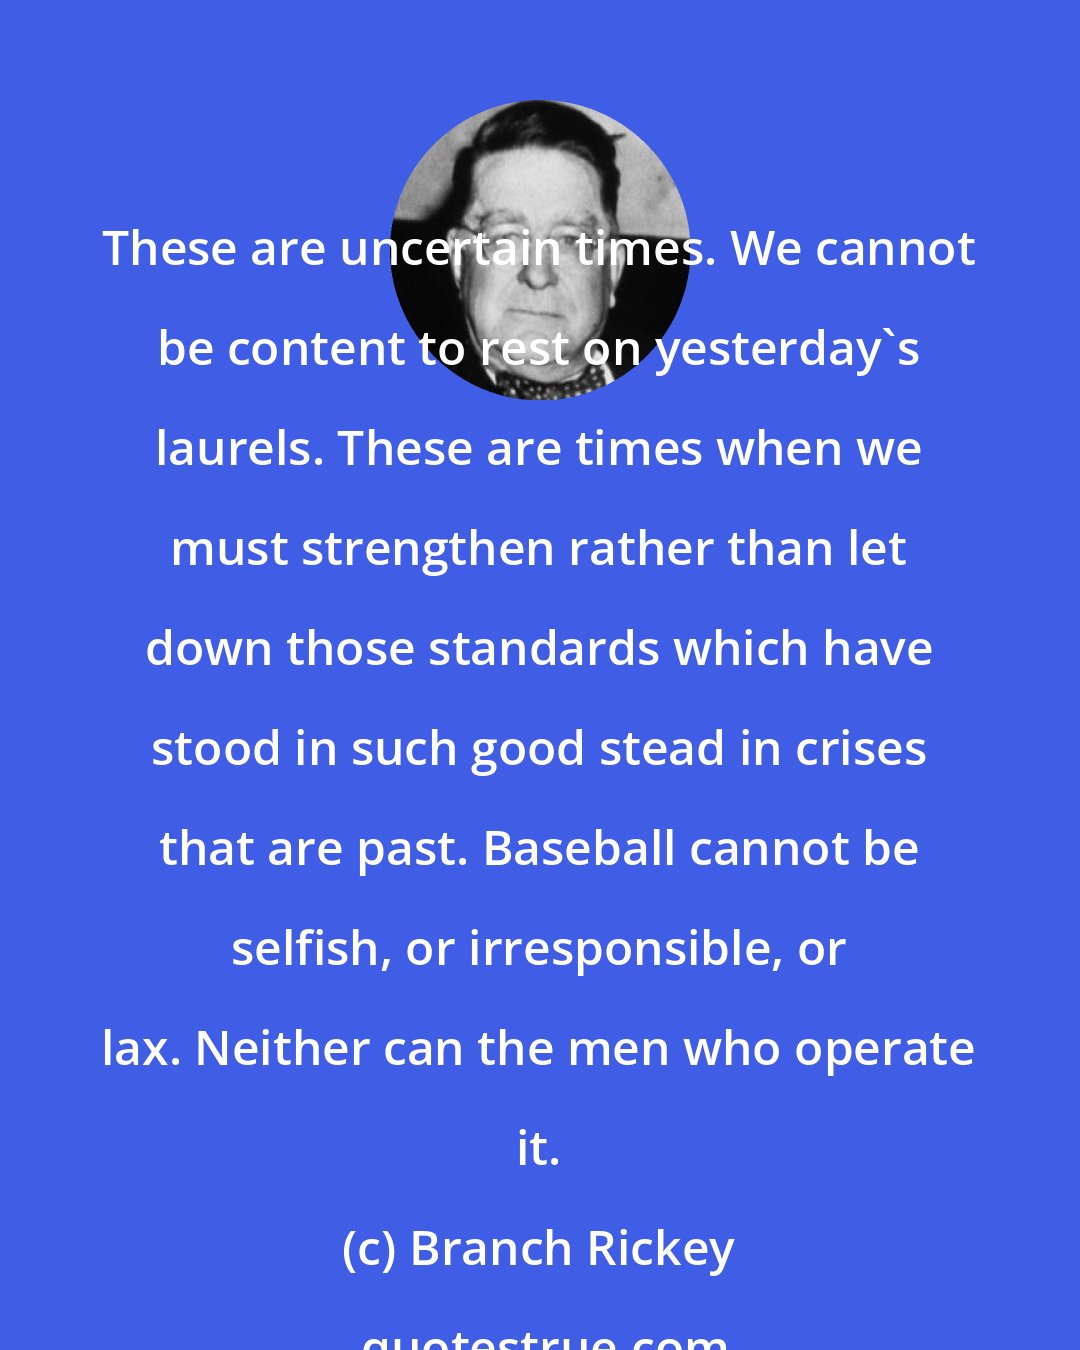 Branch Rickey: These are uncertain times. We cannot be content to rest on yesterday's laurels. These are times when we must strengthen rather than let down those standards which have stood in such good stead in crises that are past. Baseball cannot be selfish, or irresponsible, or lax. Neither can the men who operate it.